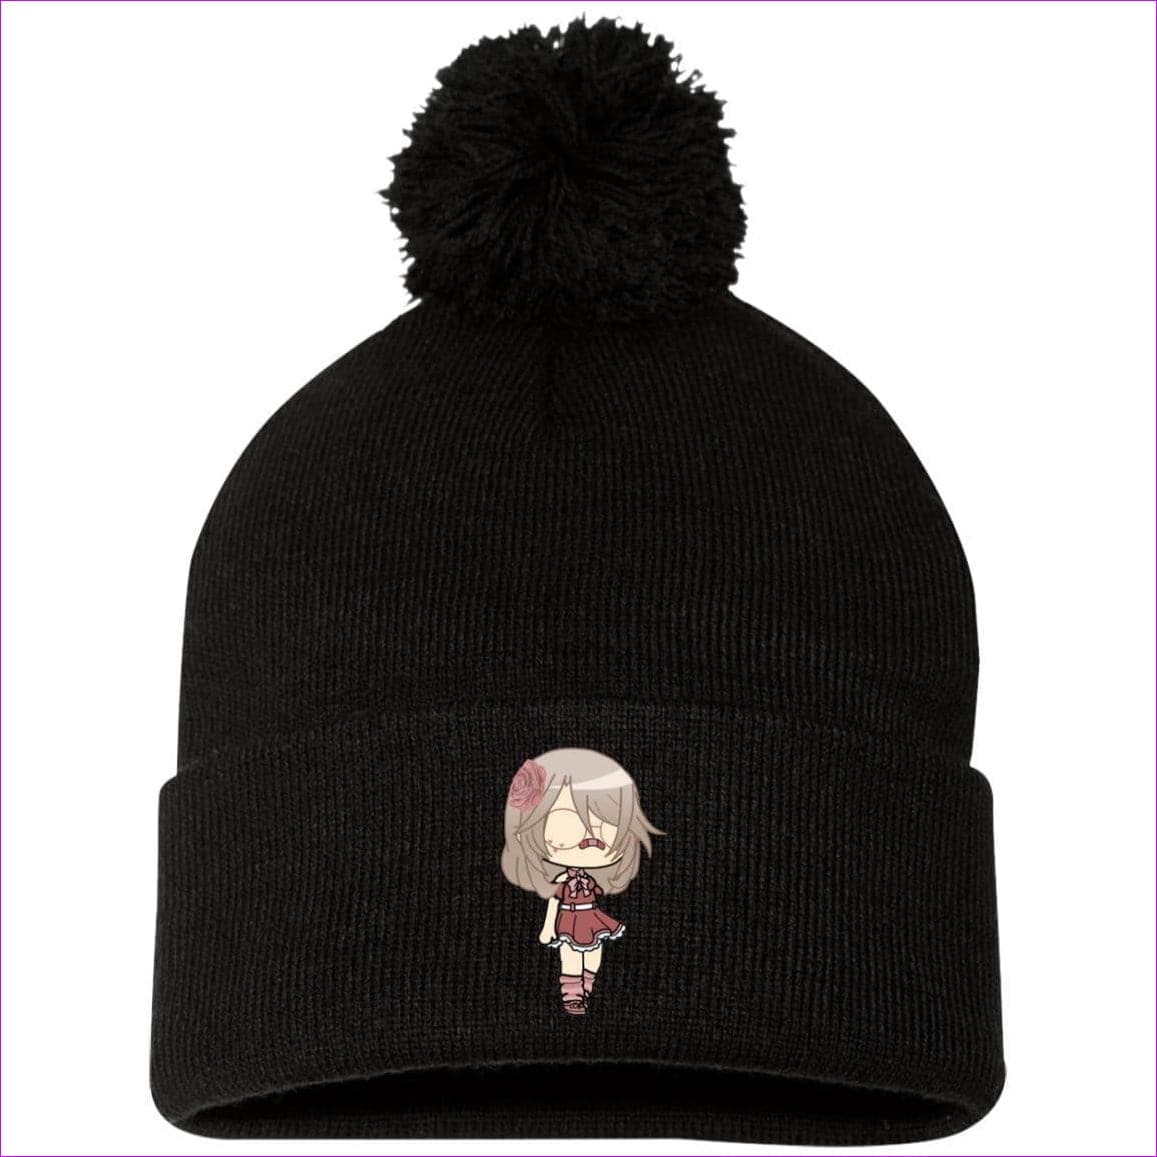 SP15 Pom Pom Knit Cap8 Black One Size - Embroidered Slouch Beanie - Beanie at TFC&H Co.